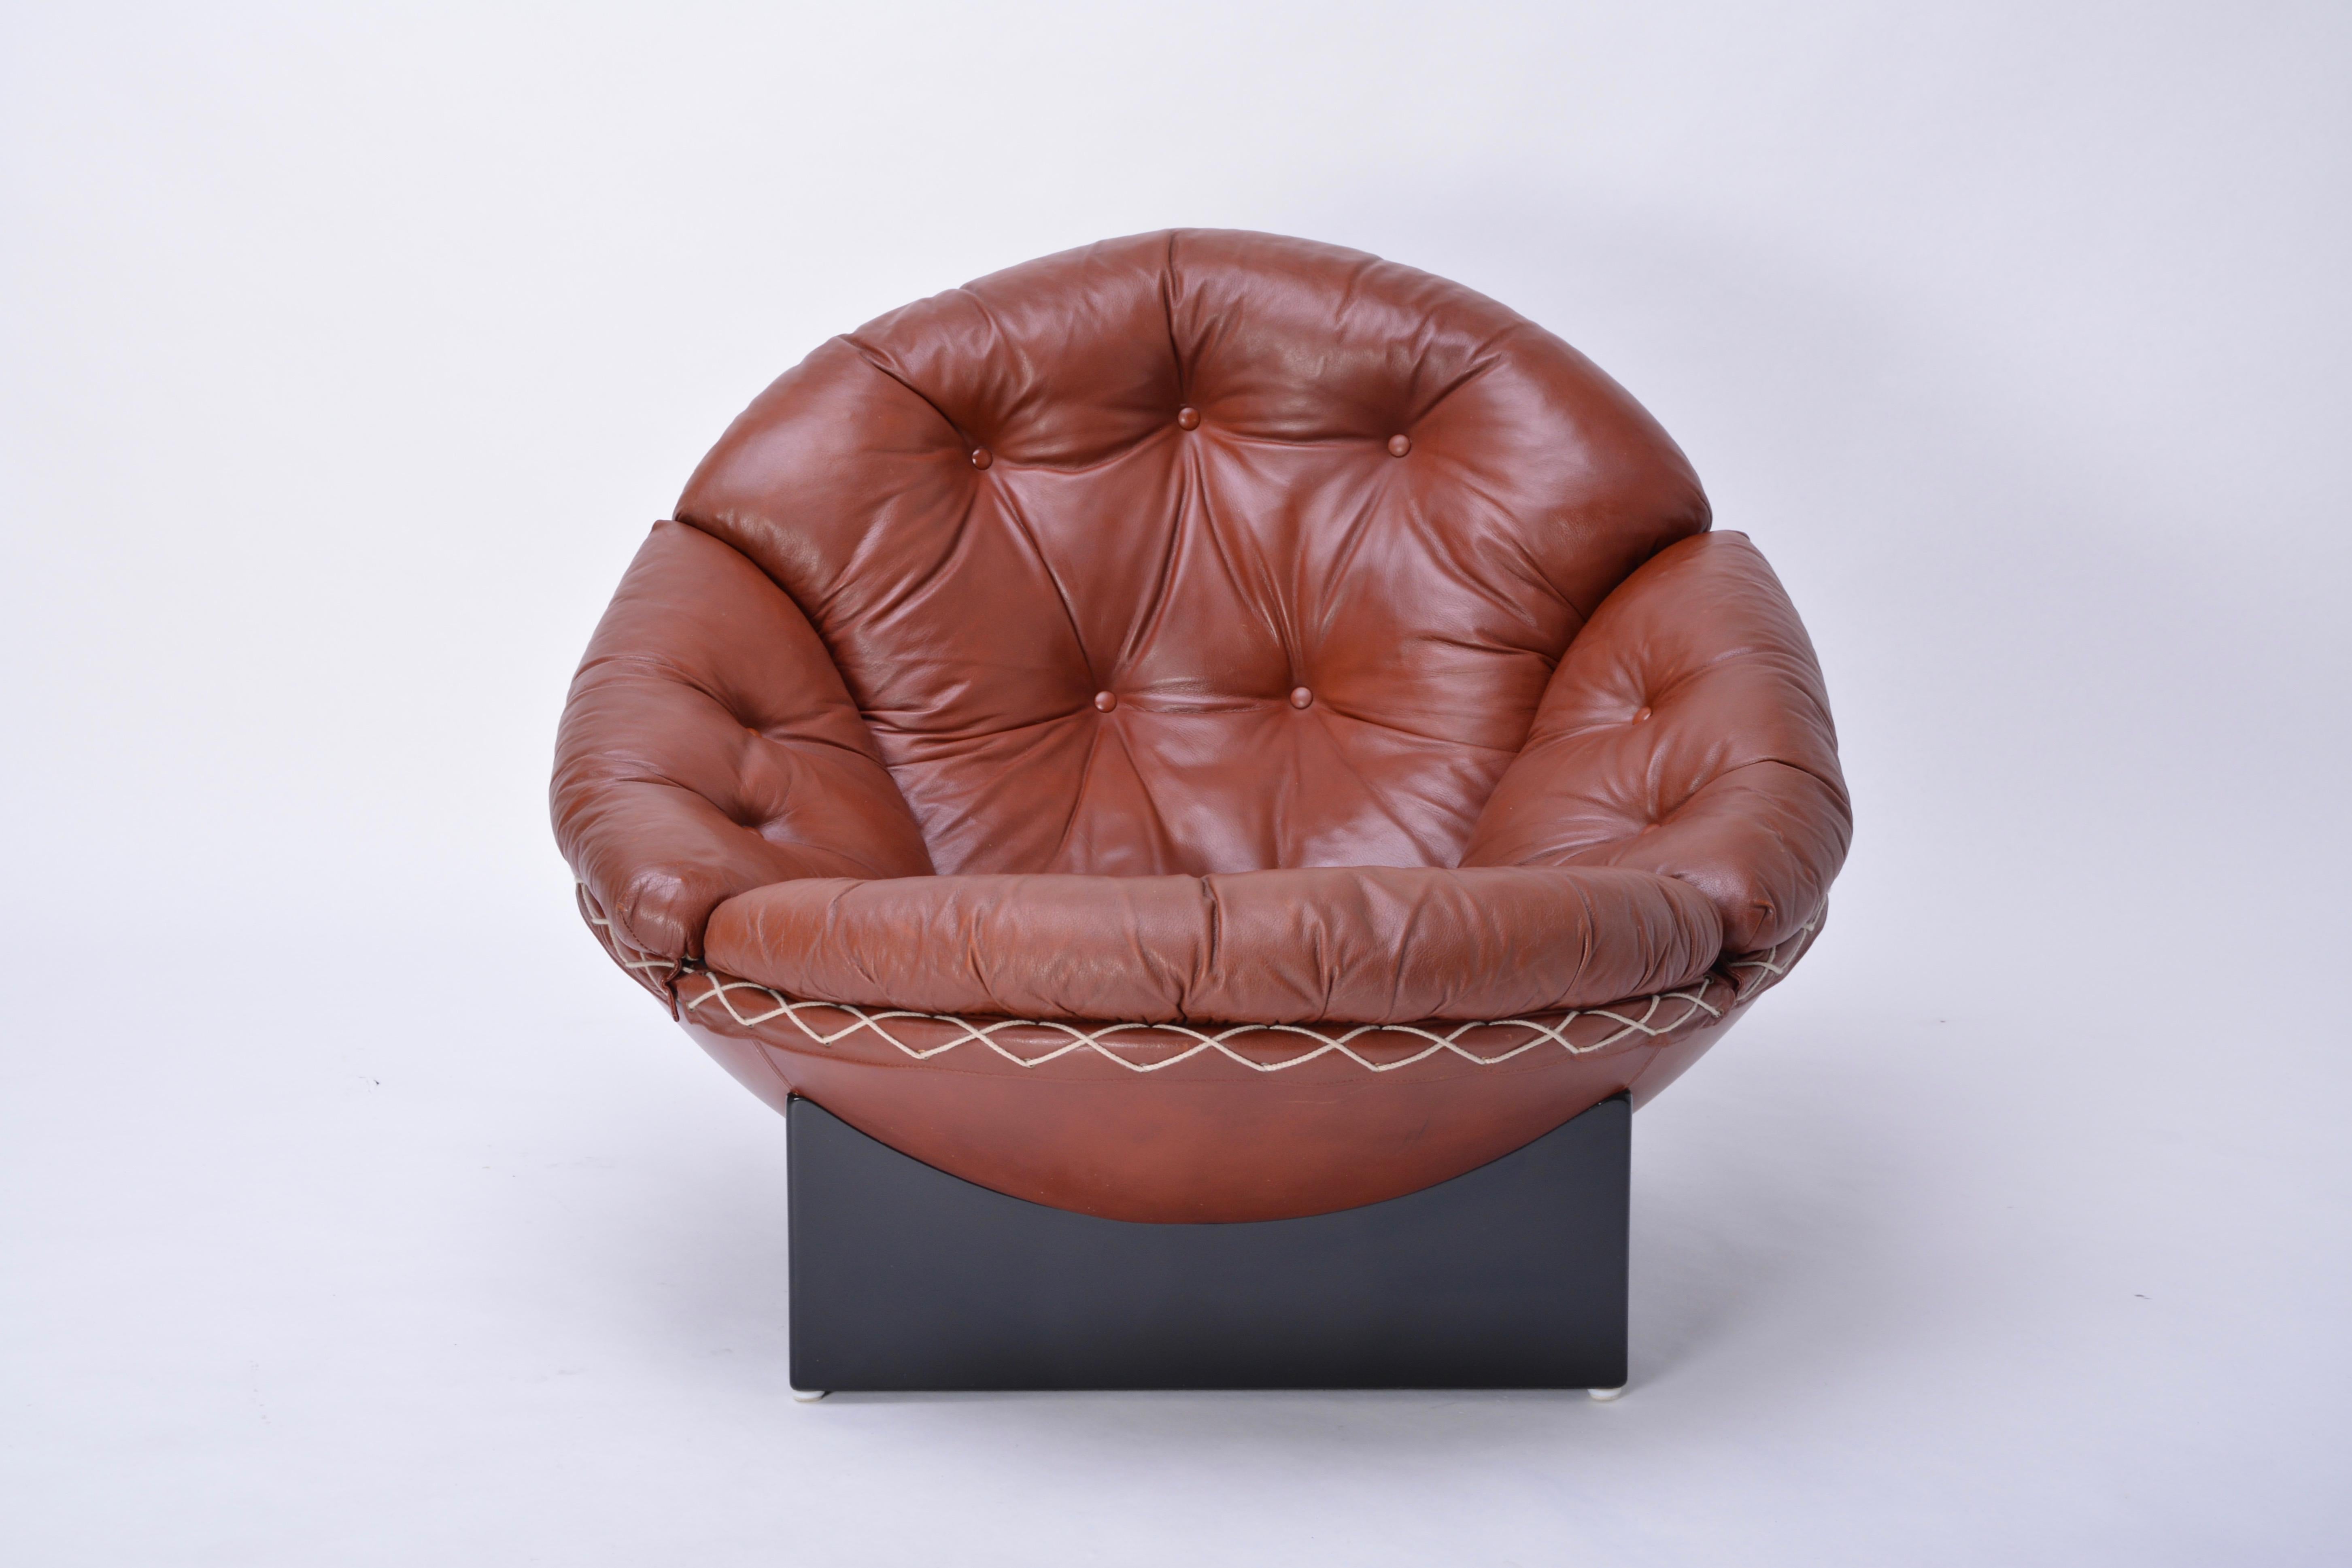 Mid-Century Modern Leather lounge Chair by Illum Wikkelsø for Ryesberg Møbler
This is a rare bowl chair by Illum Wikkelsø for Ryesberg Møbler. The chair is still covered in their original leather, which is in exceptionally good condition because of